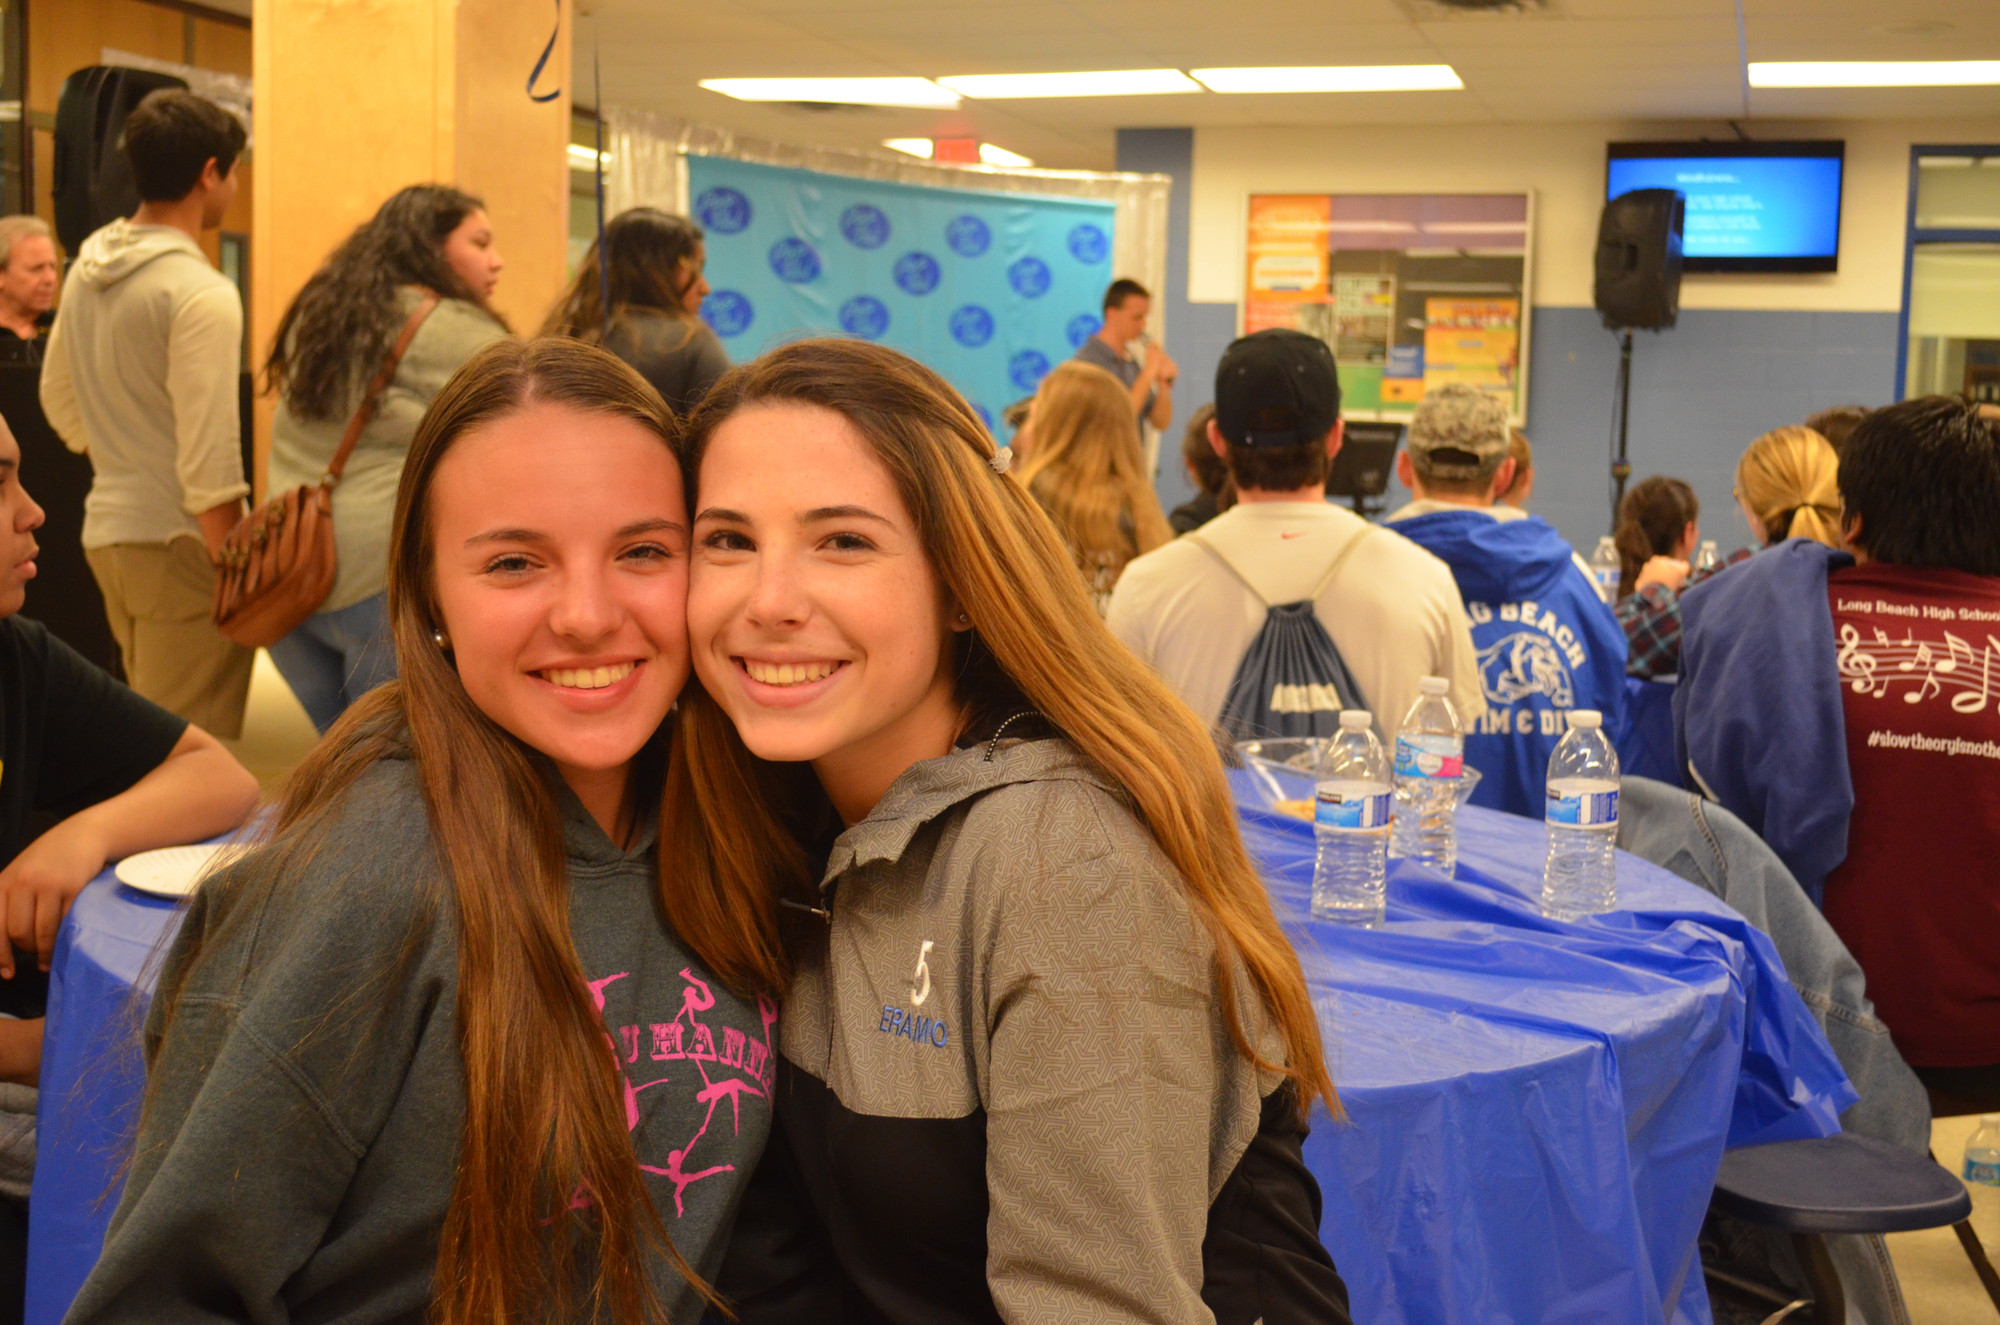 Freshmen Sydney Caven and Fiona Eramo were among the 400 students who attended Teen Nite Out on April 15.